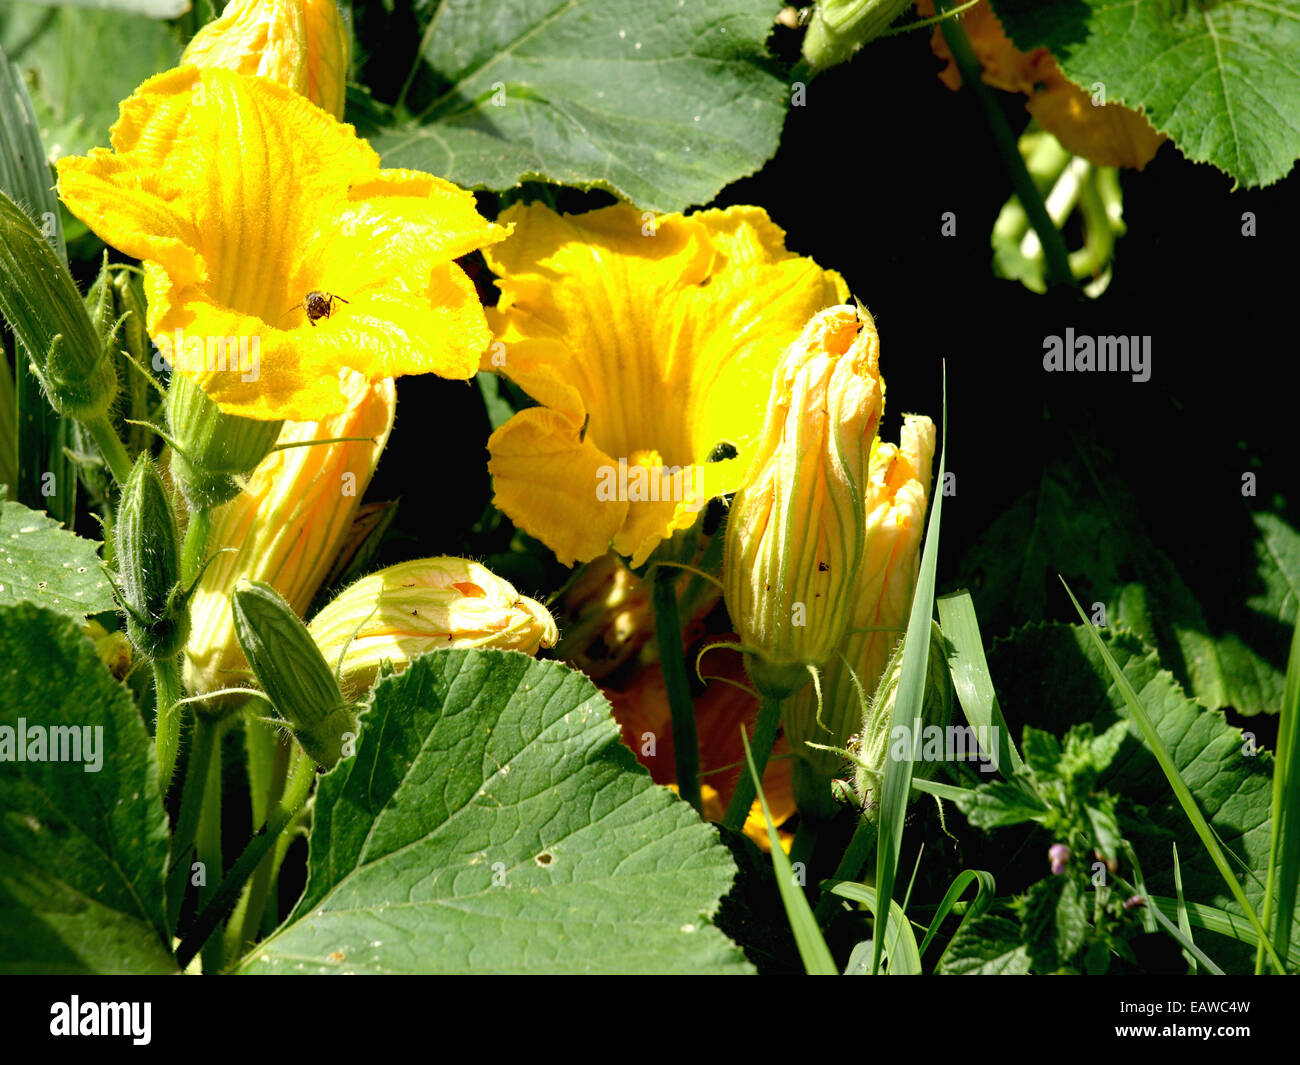 Pumpkin with yellow flowers growing in the field Stock Photo